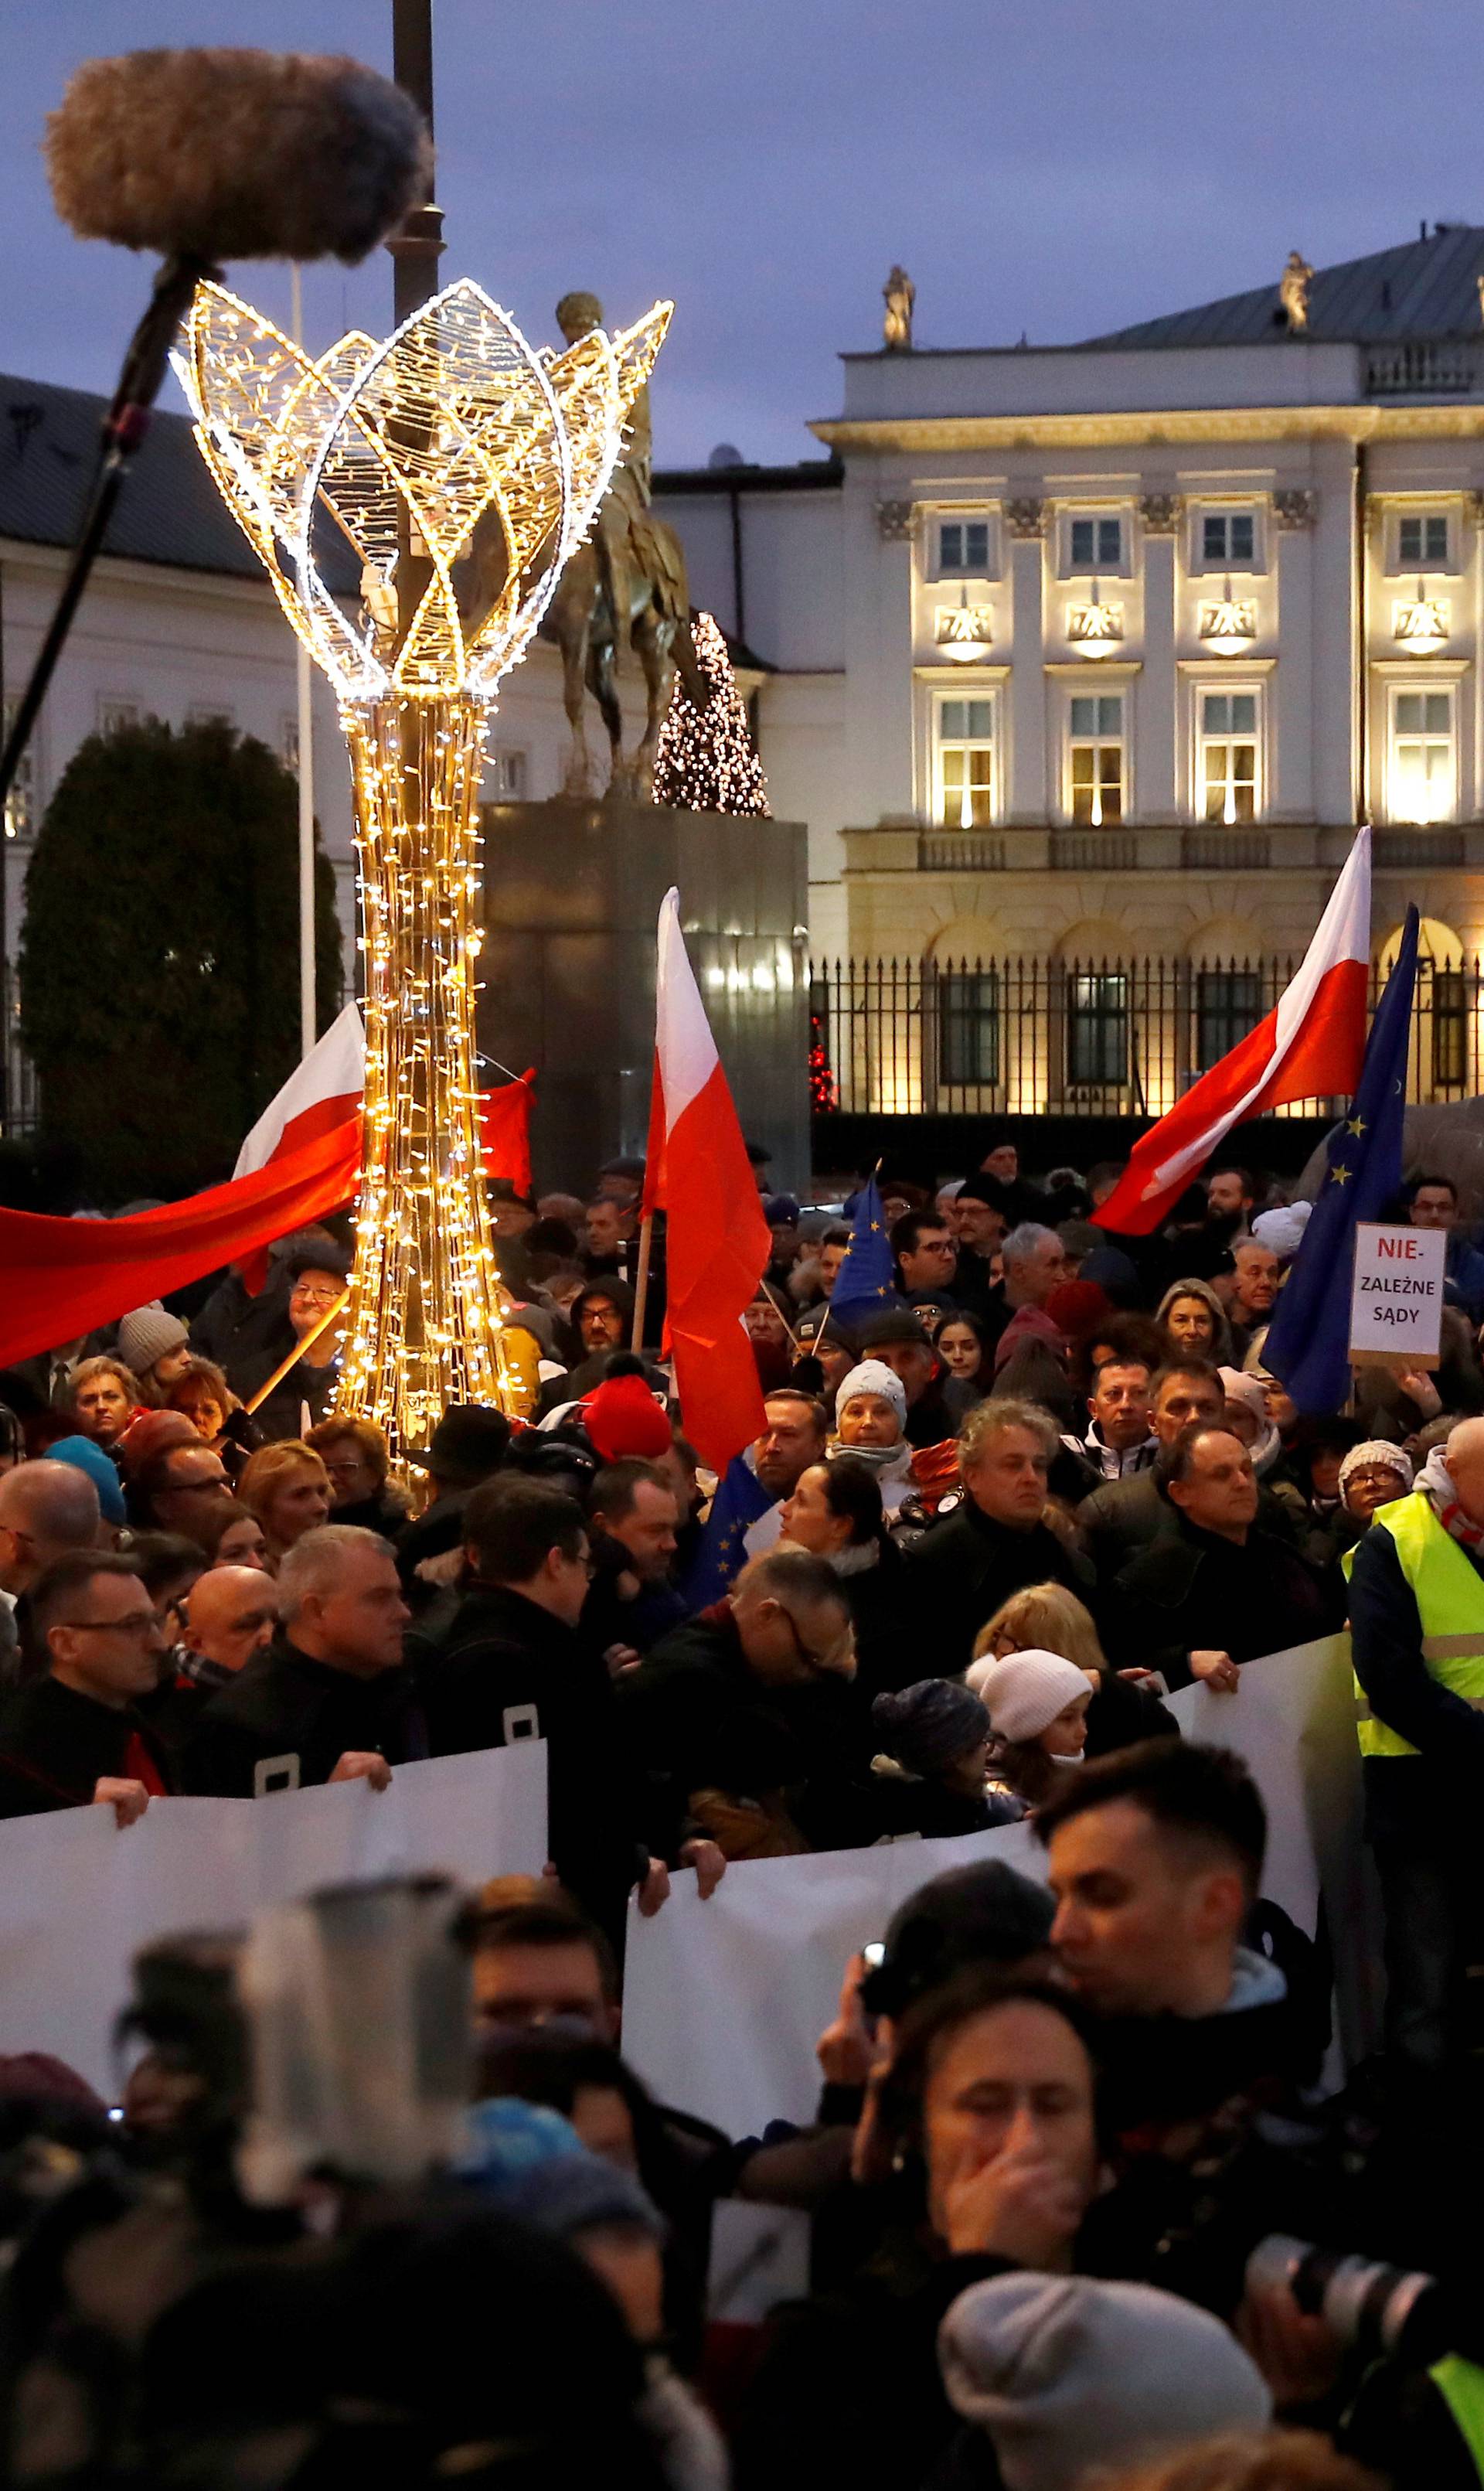 People protest against judiciary reform in Warsaw